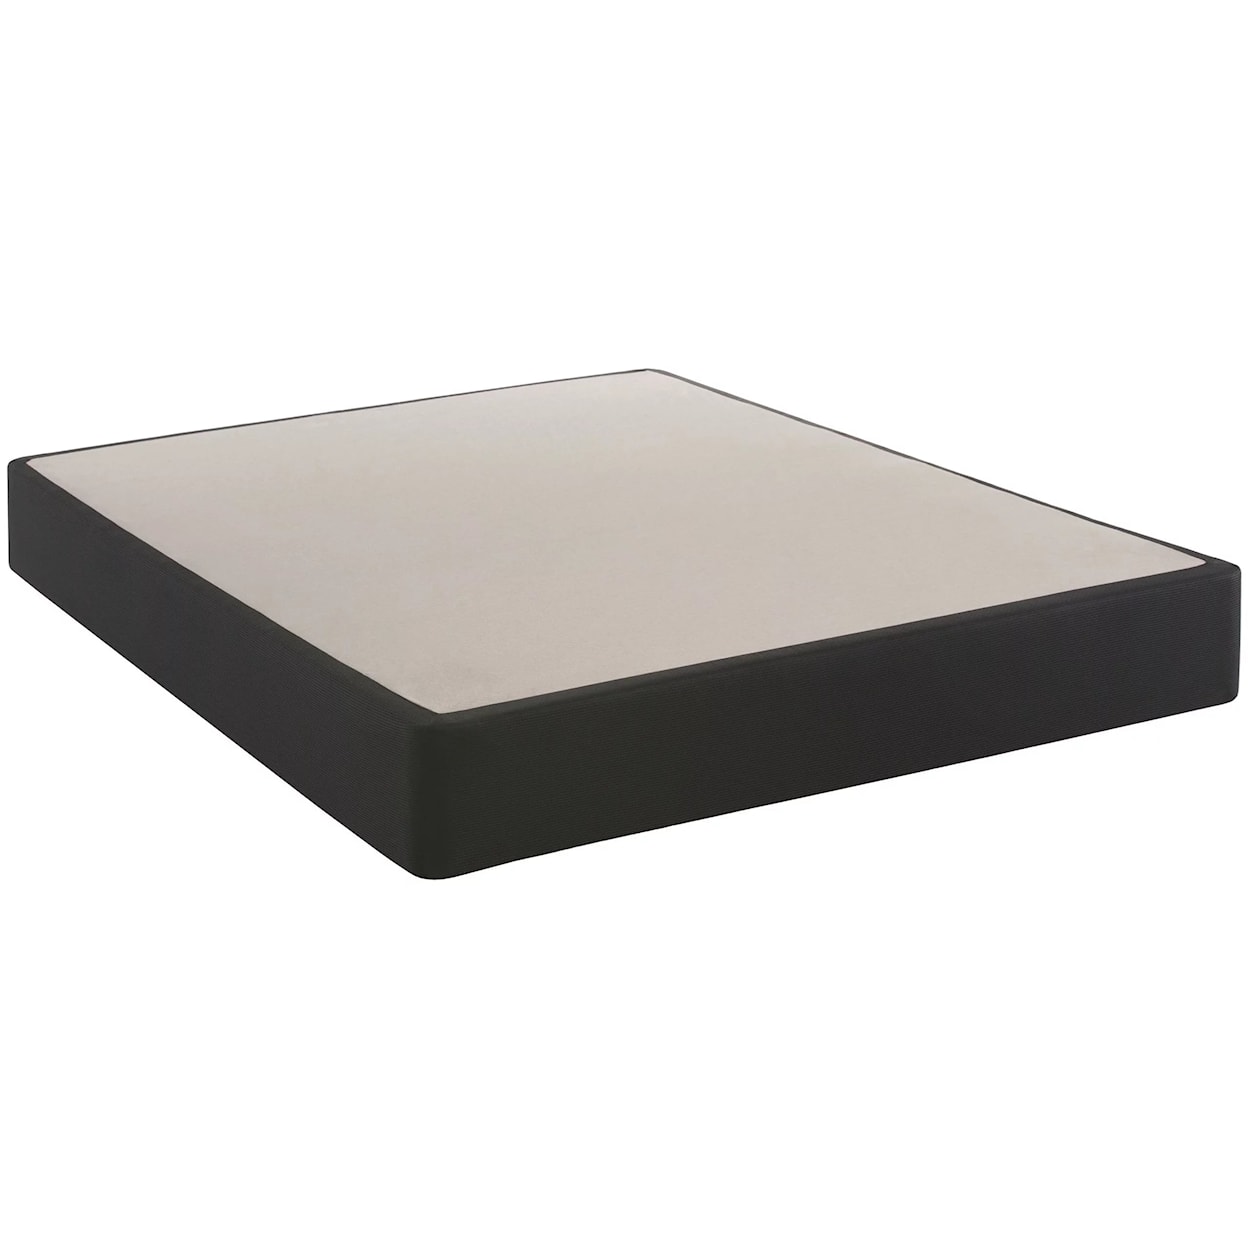 Justice Furniture Justice Bedding Foundations Full Standard Base 9" Height